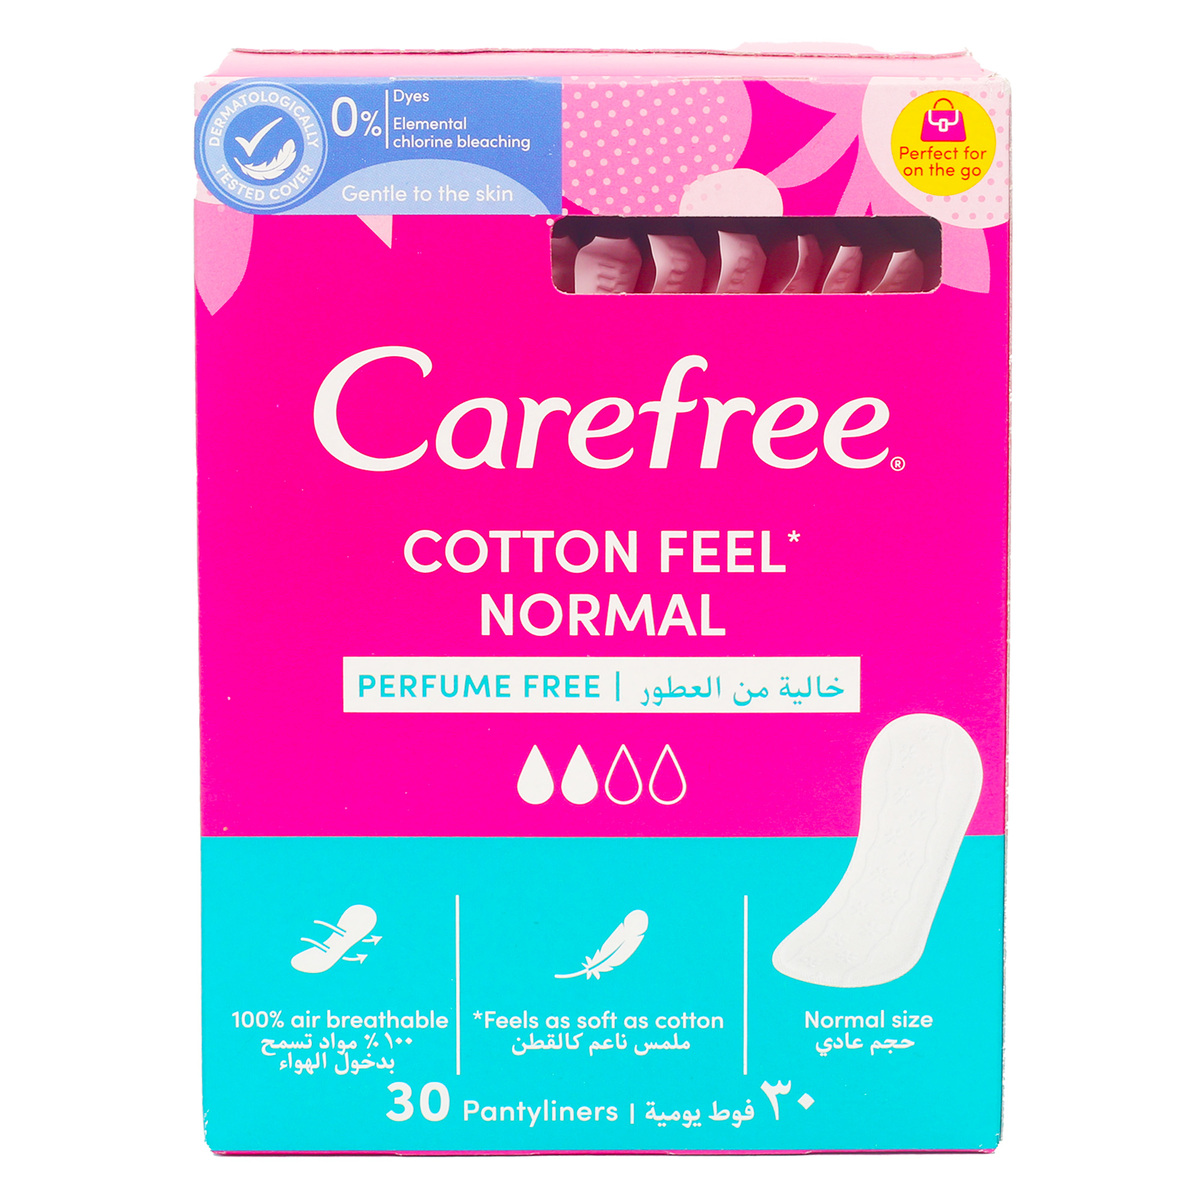 CAREFREE Panty Liners Cotton Unscented 76pcs